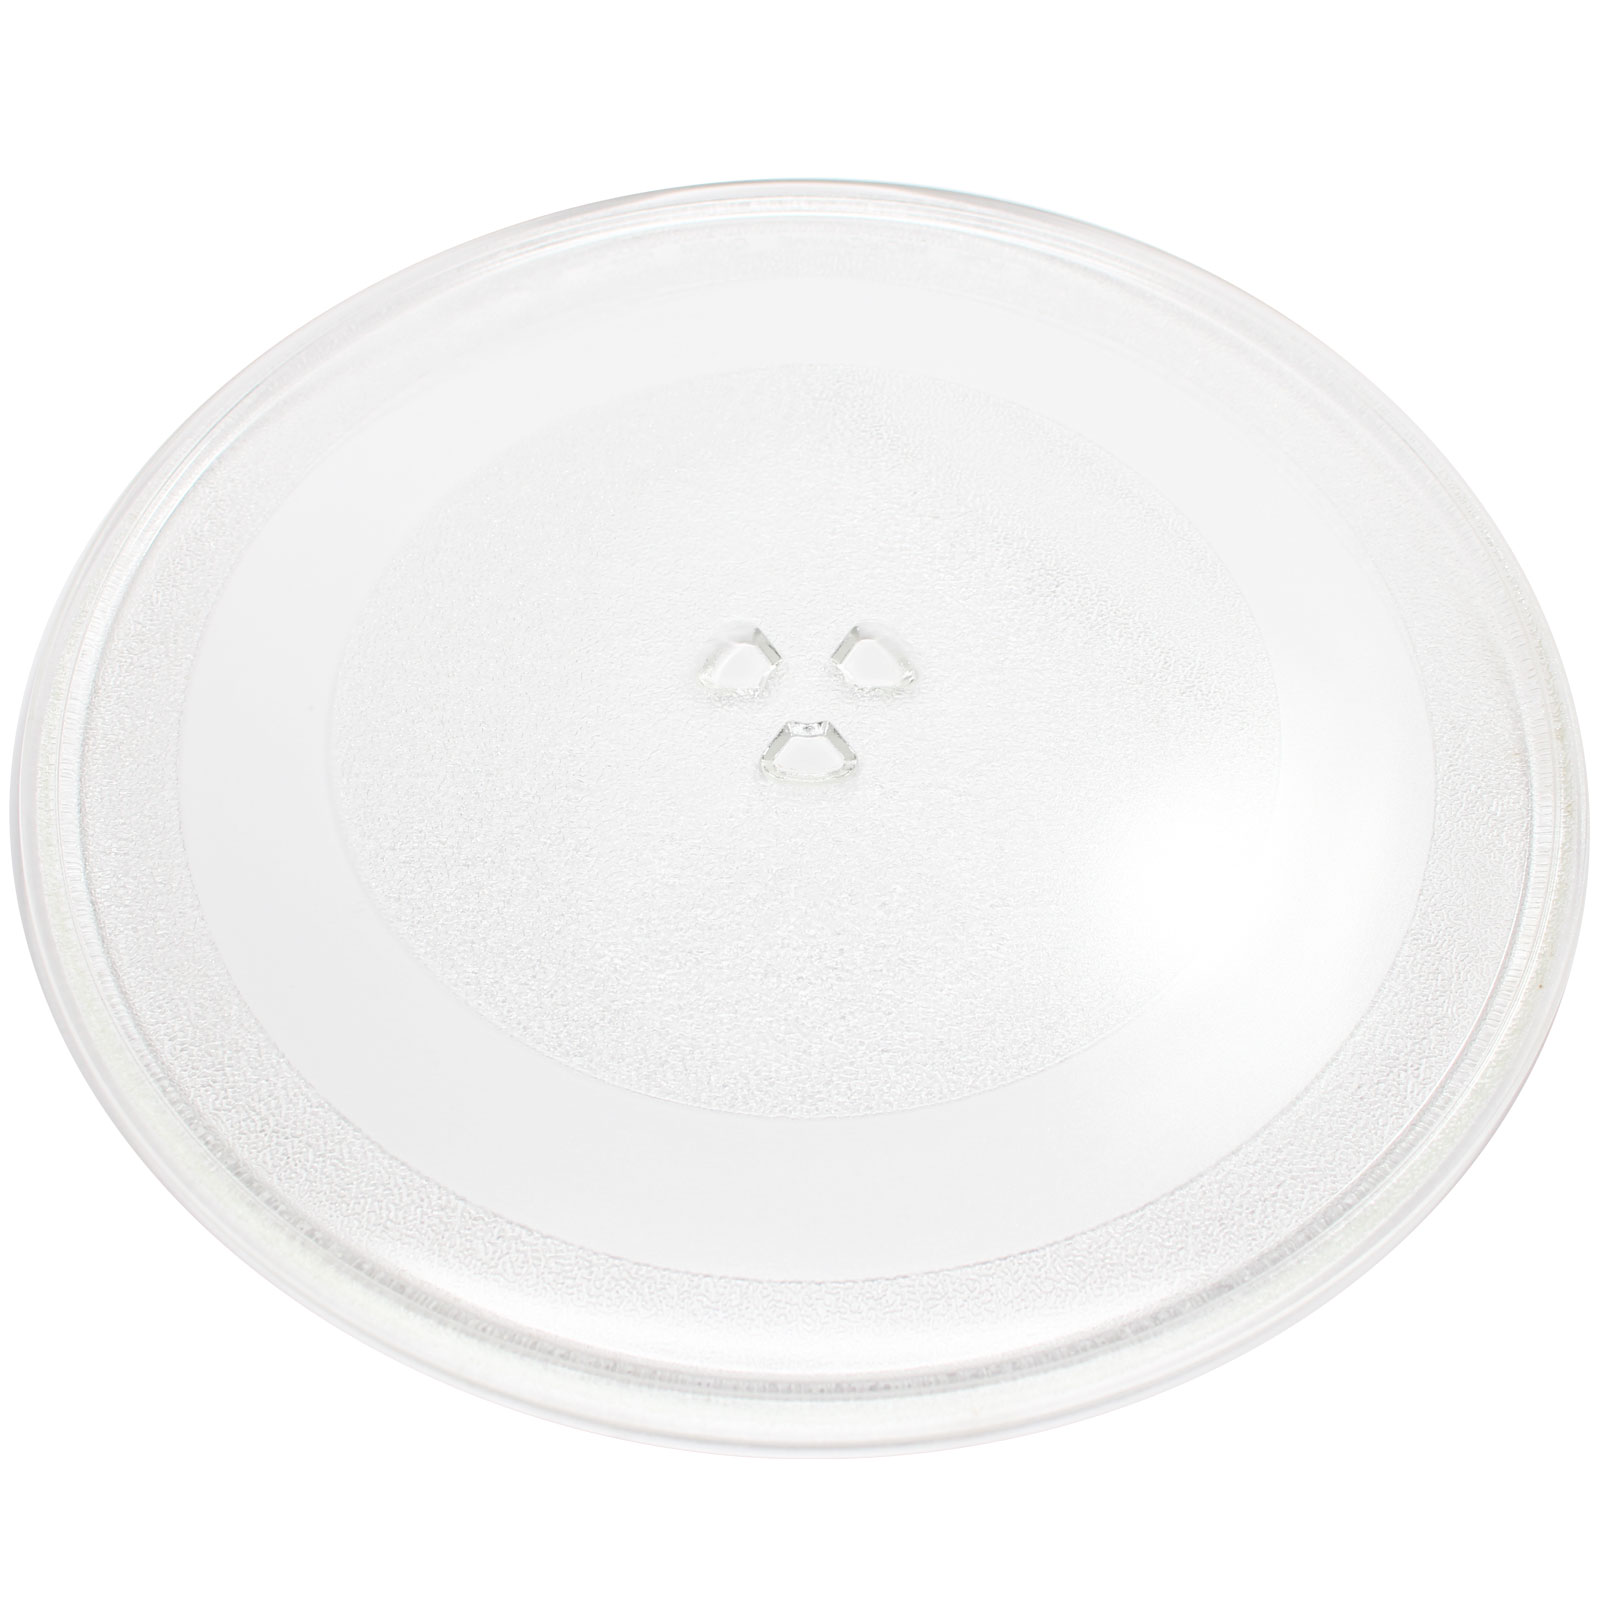 UpStart Components Replacement GE JVM1630WJ03 Microwave Glass Plate  - Compatible GE WB49X10114 Microwave Glass Turntable Tray - 13 1/2" (345mm)